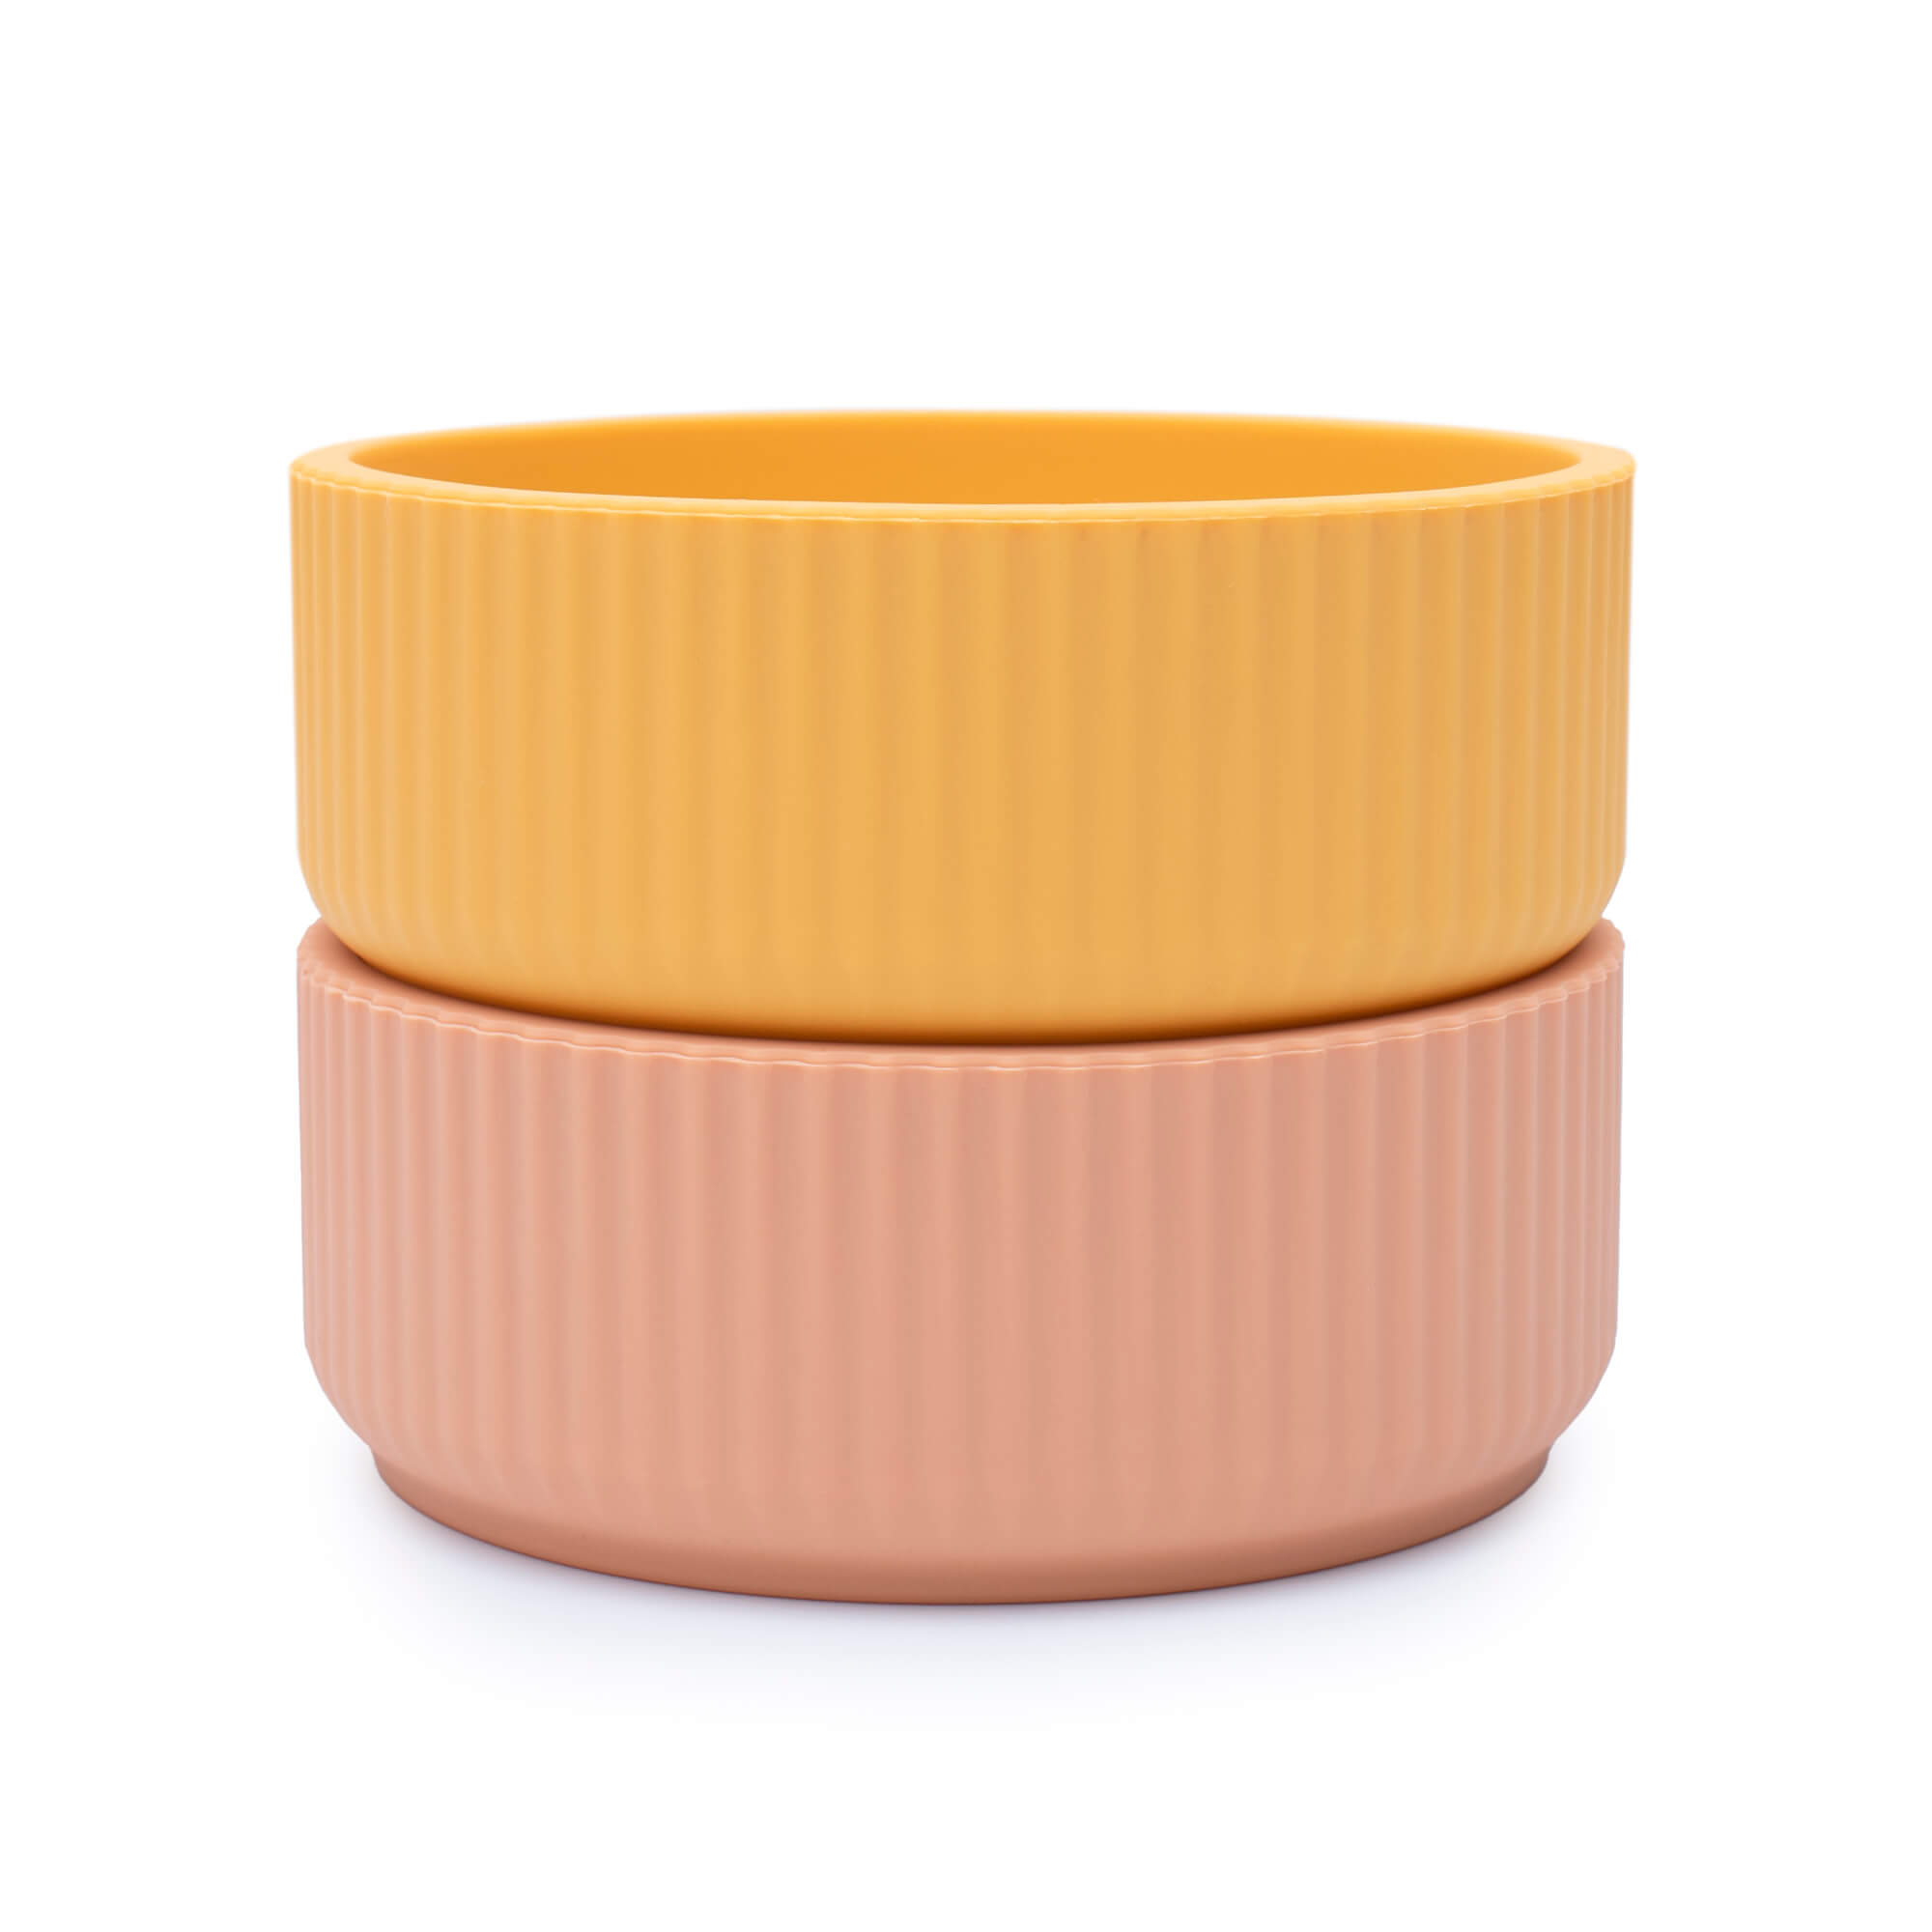 Picnies Outdoor Bowls – Sunshine